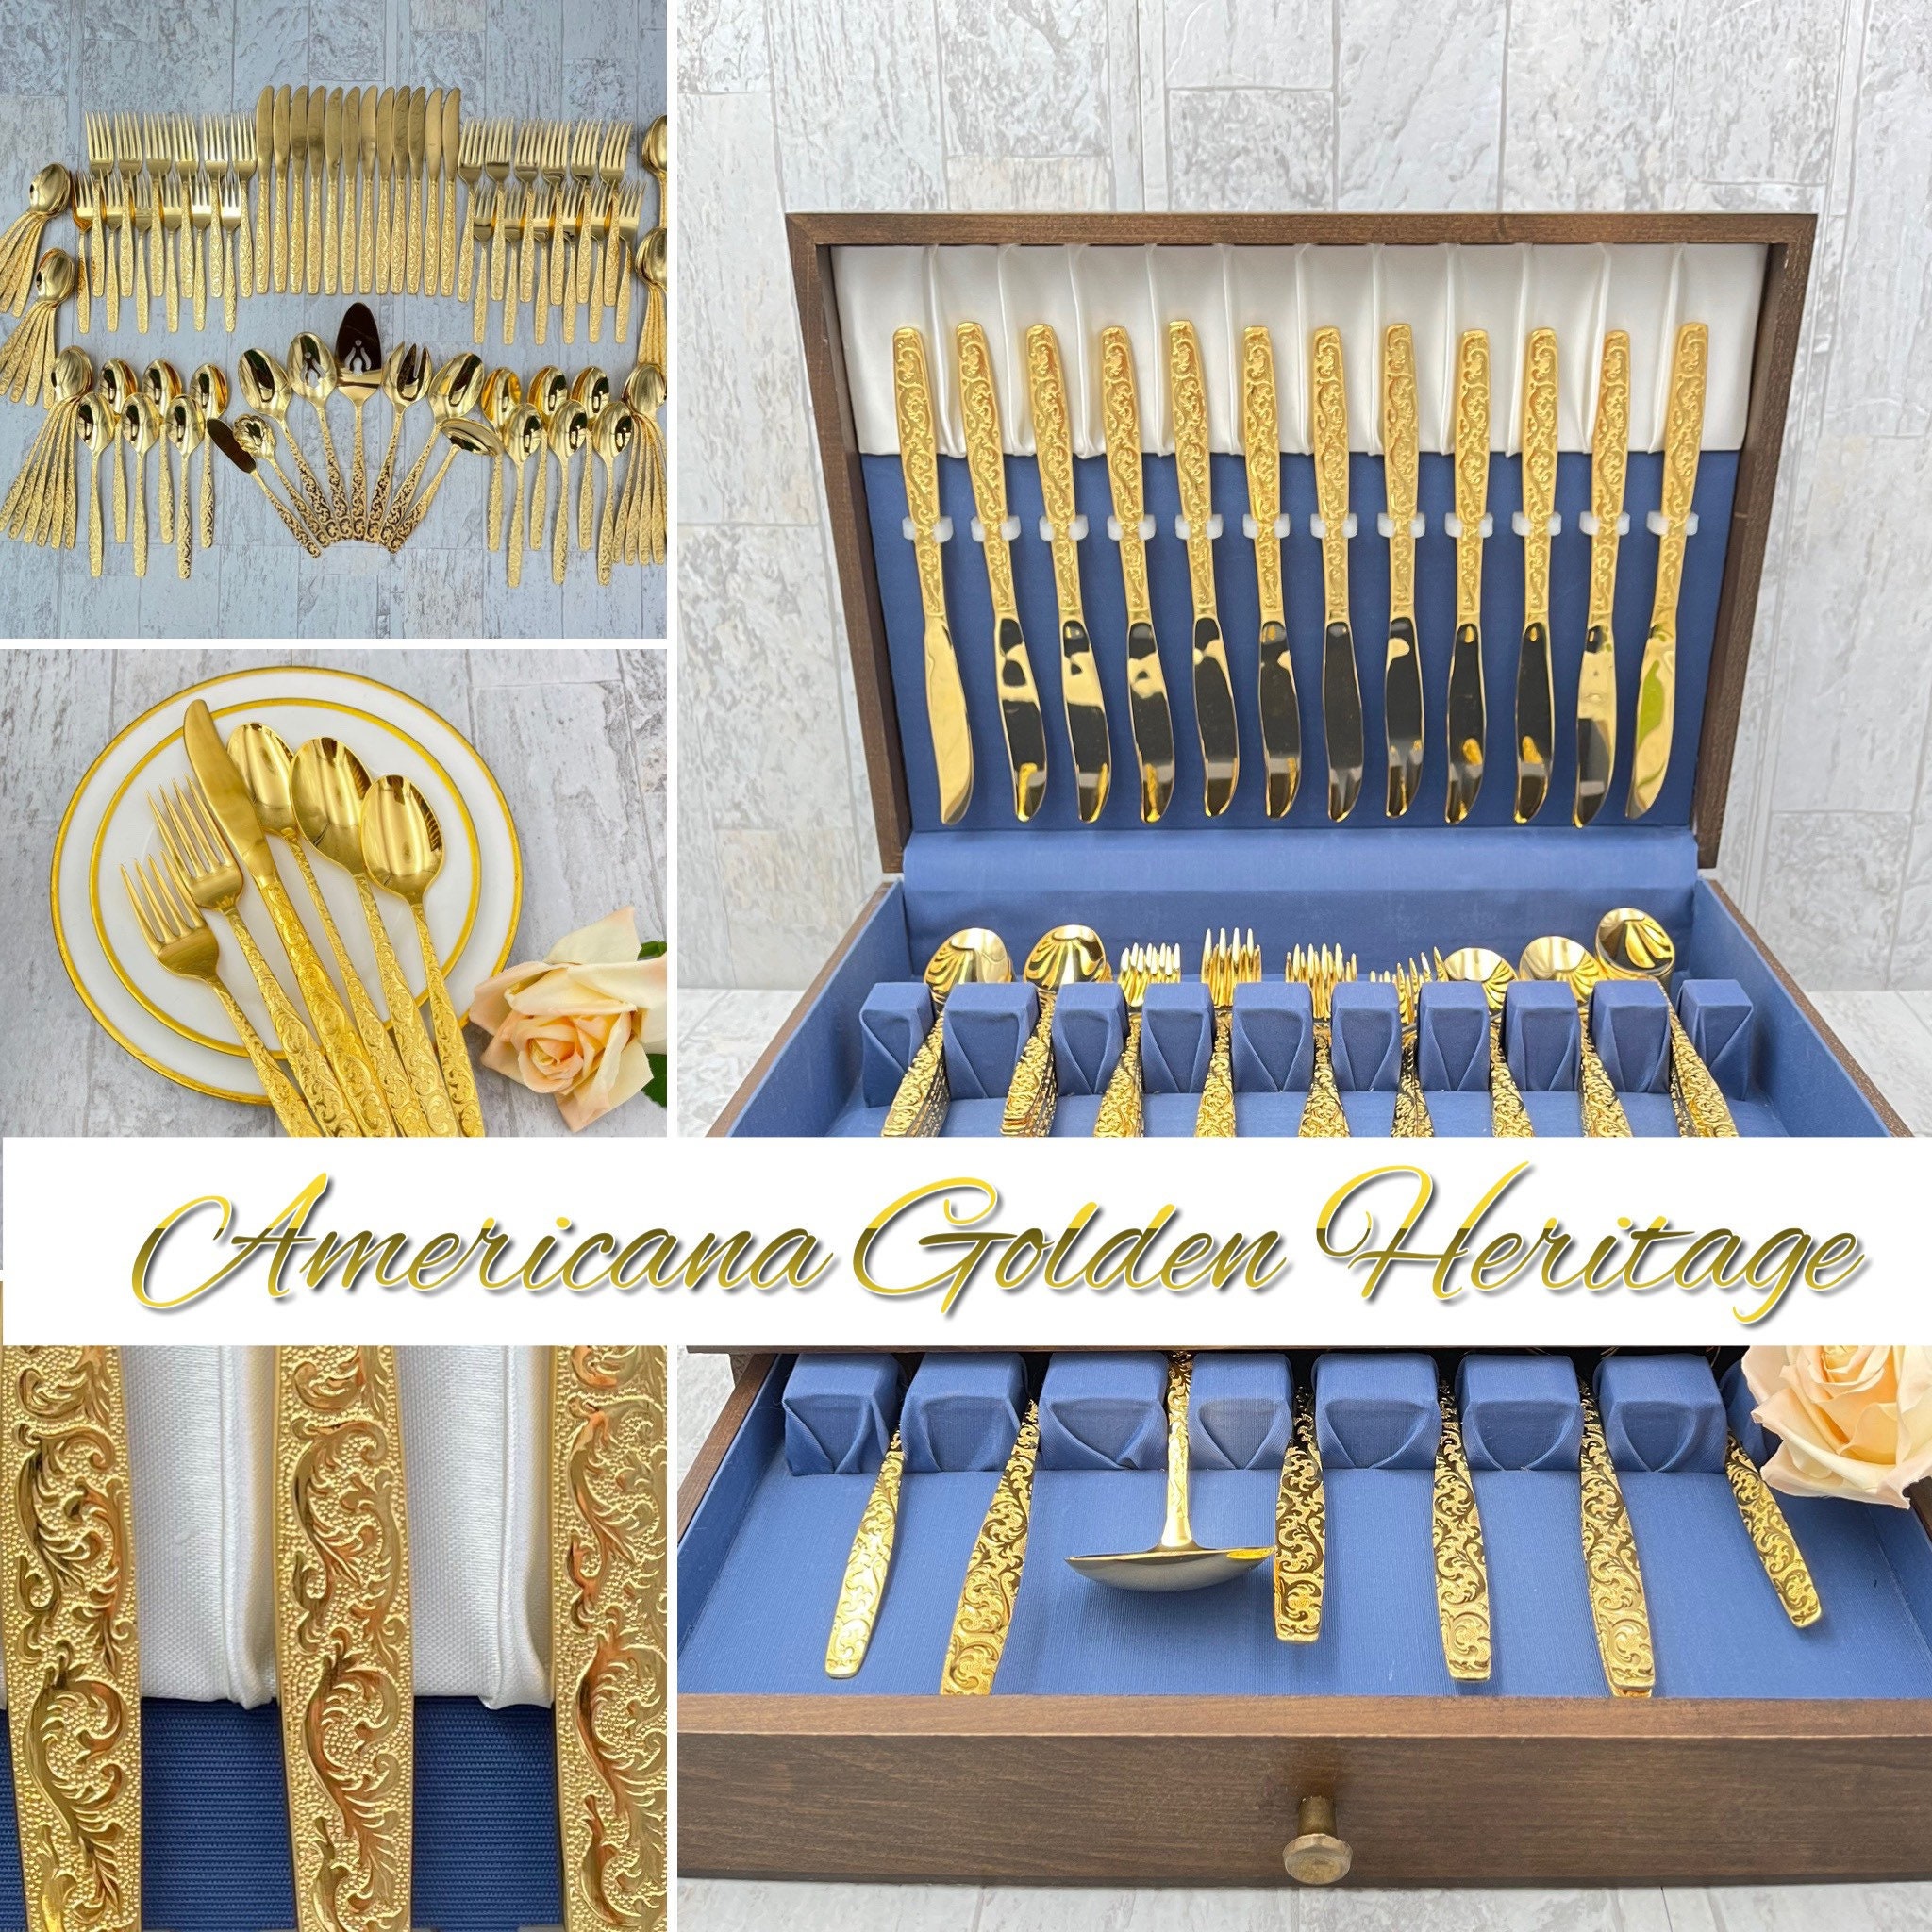 Vintage Gold Flatware set with silverware chest, service for 12